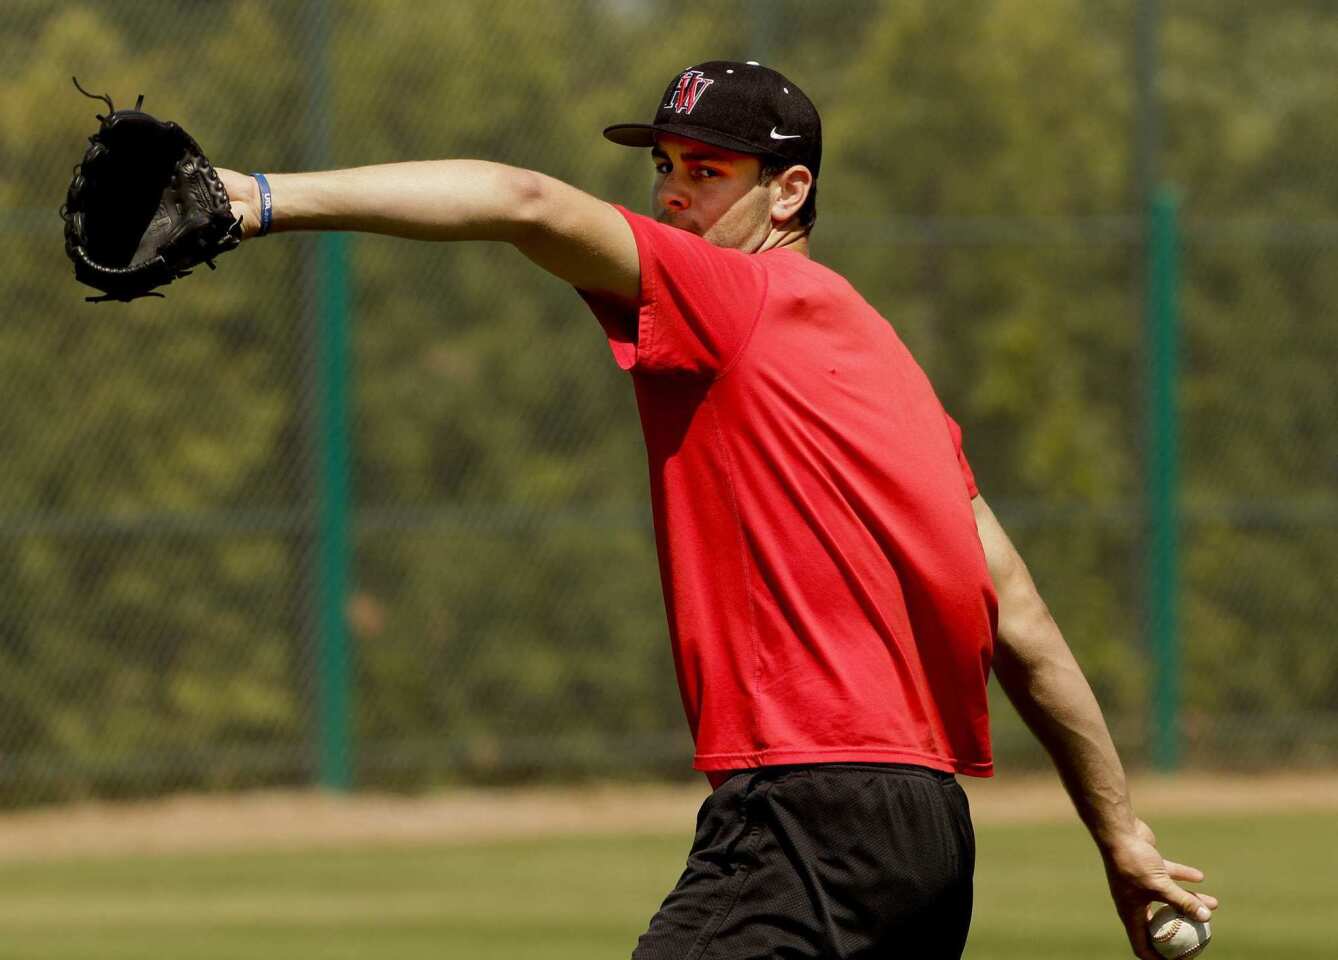 Lucas Giolito of Harvard-Westlake High pitches in public for the first time since rehabilitation from an elbow injury this spring during a workout at O'Malley Family Field in Encino.